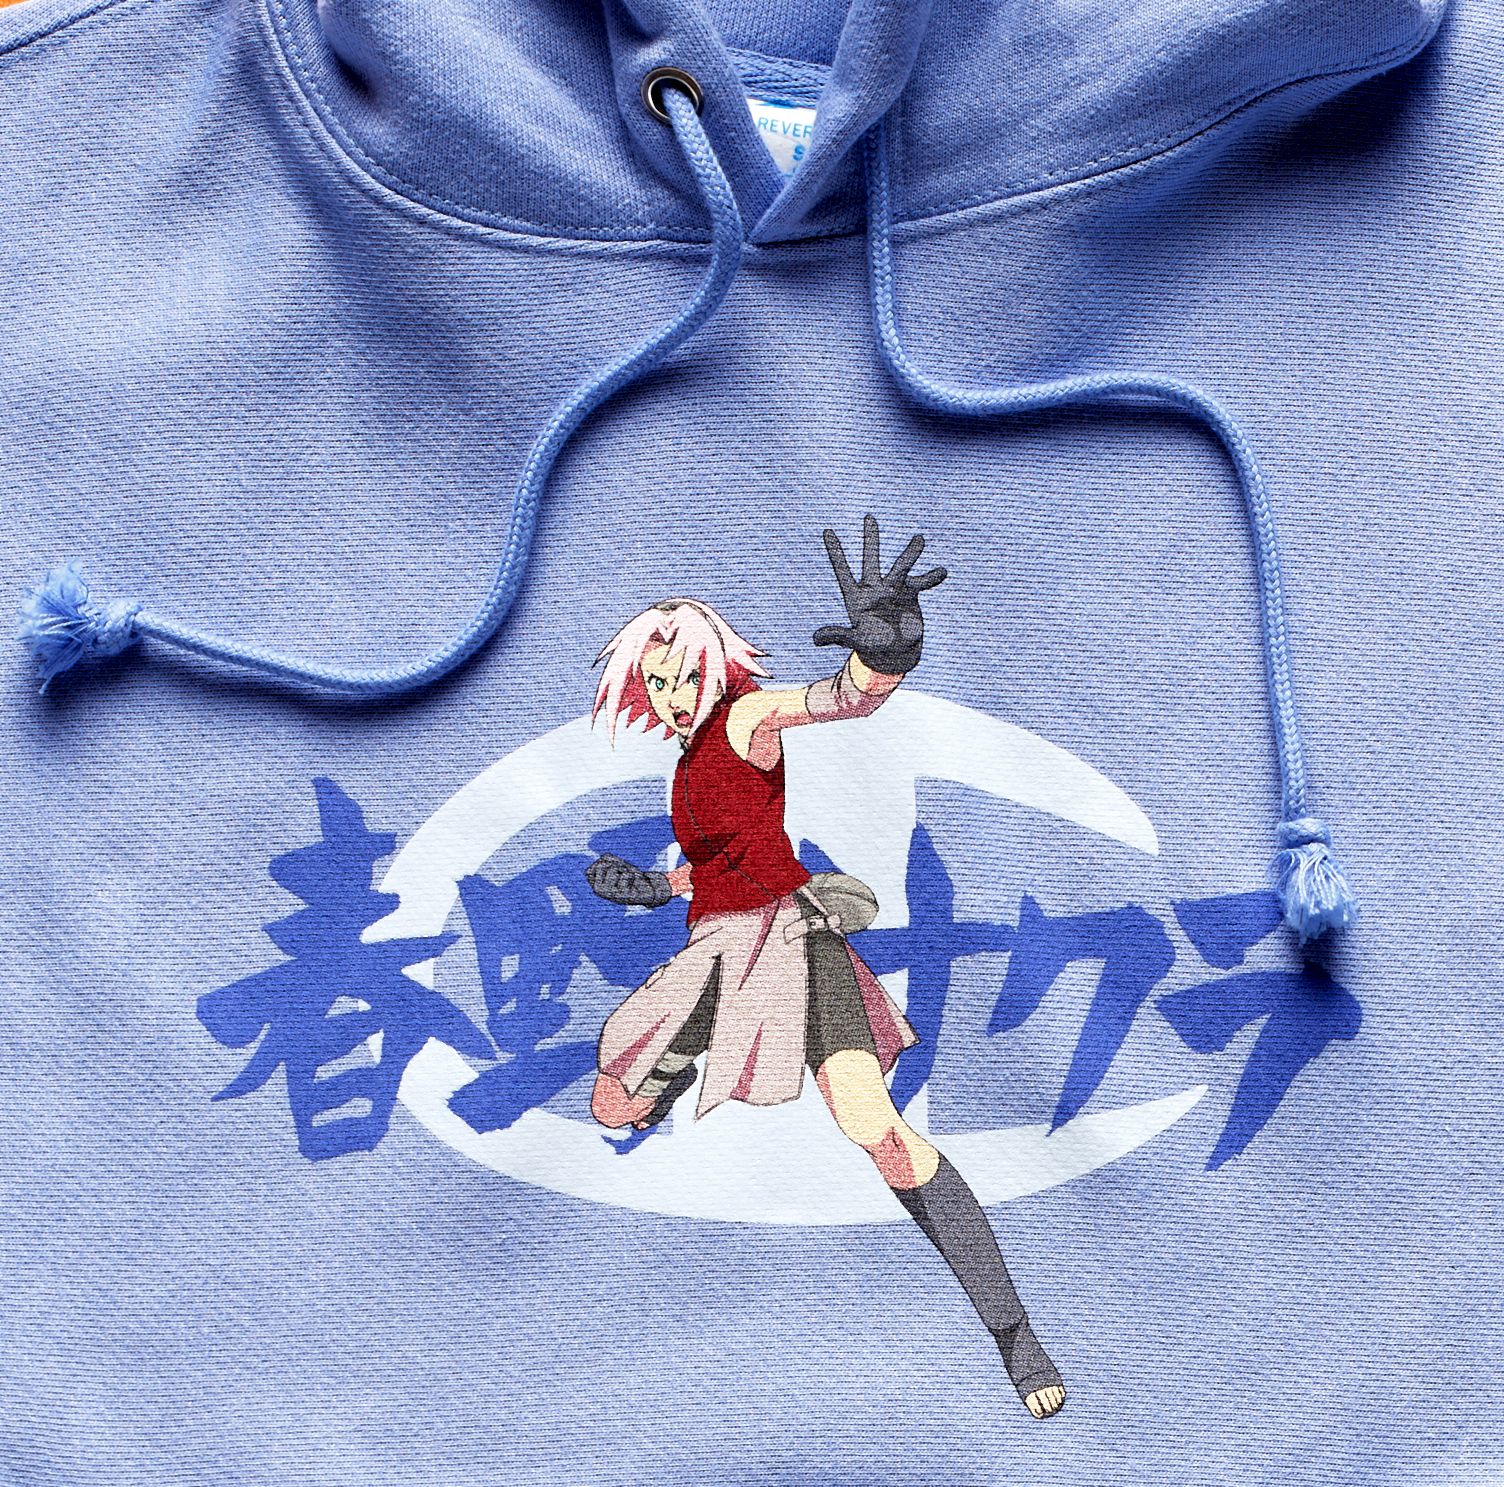 Champion's “Naruto” Collab Is The Brand's First Anime Collection